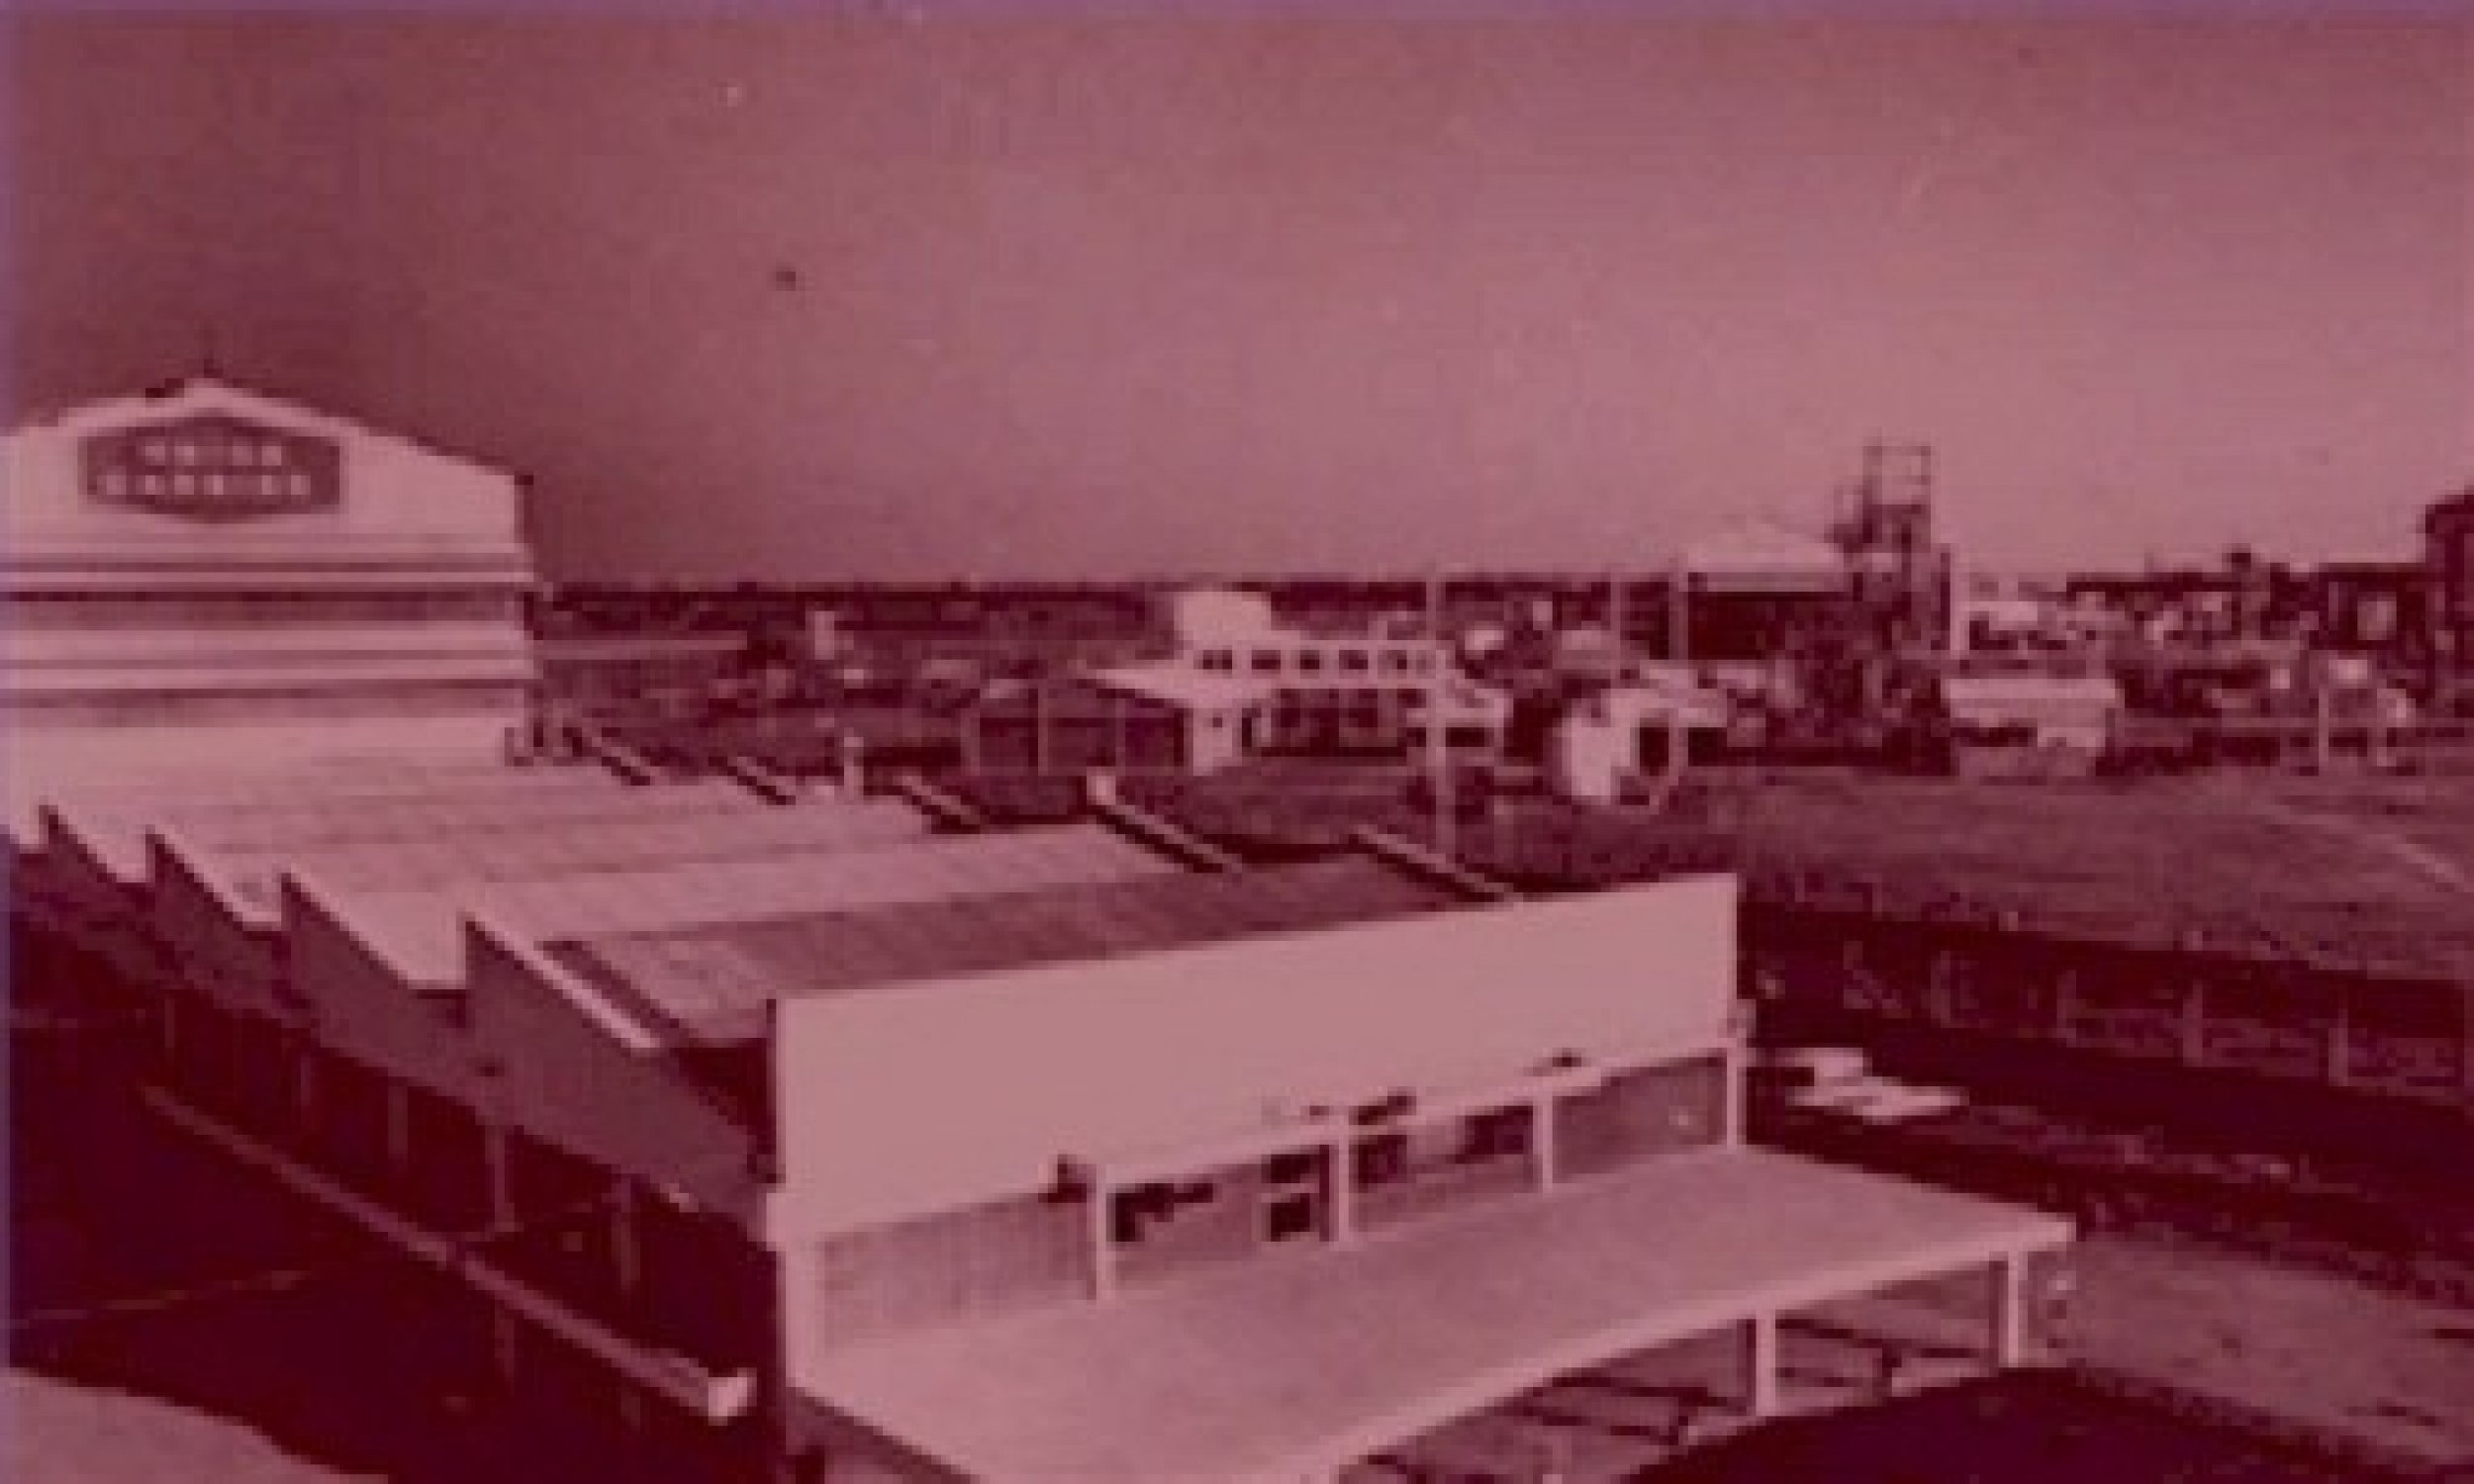 Union Carbide factory in Bhopal, India.